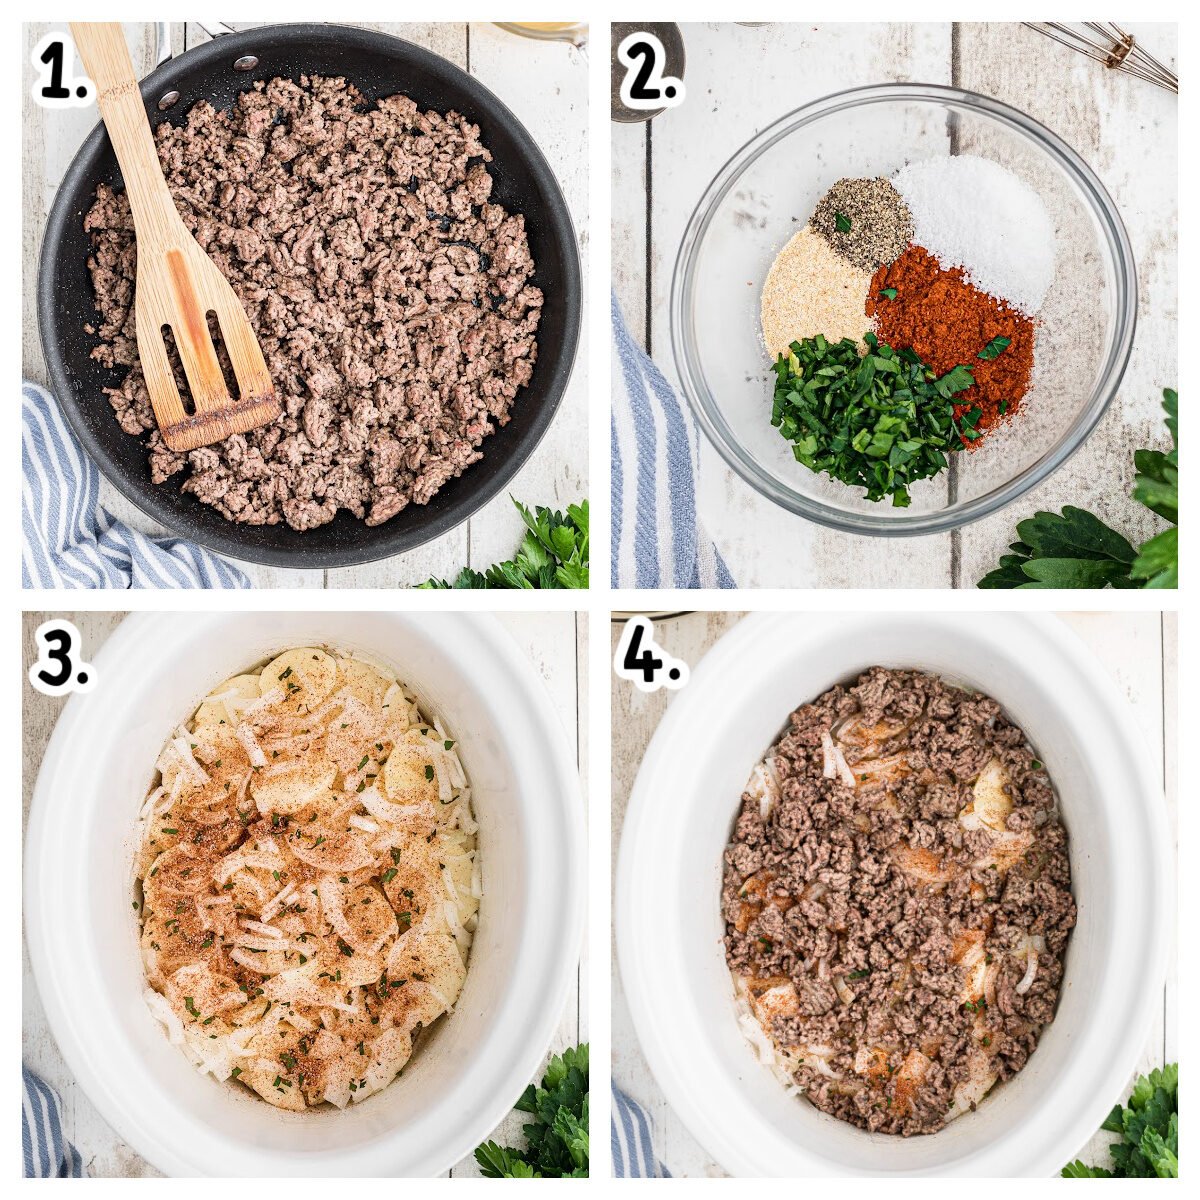 Images showing how to make beef and potato gratin.